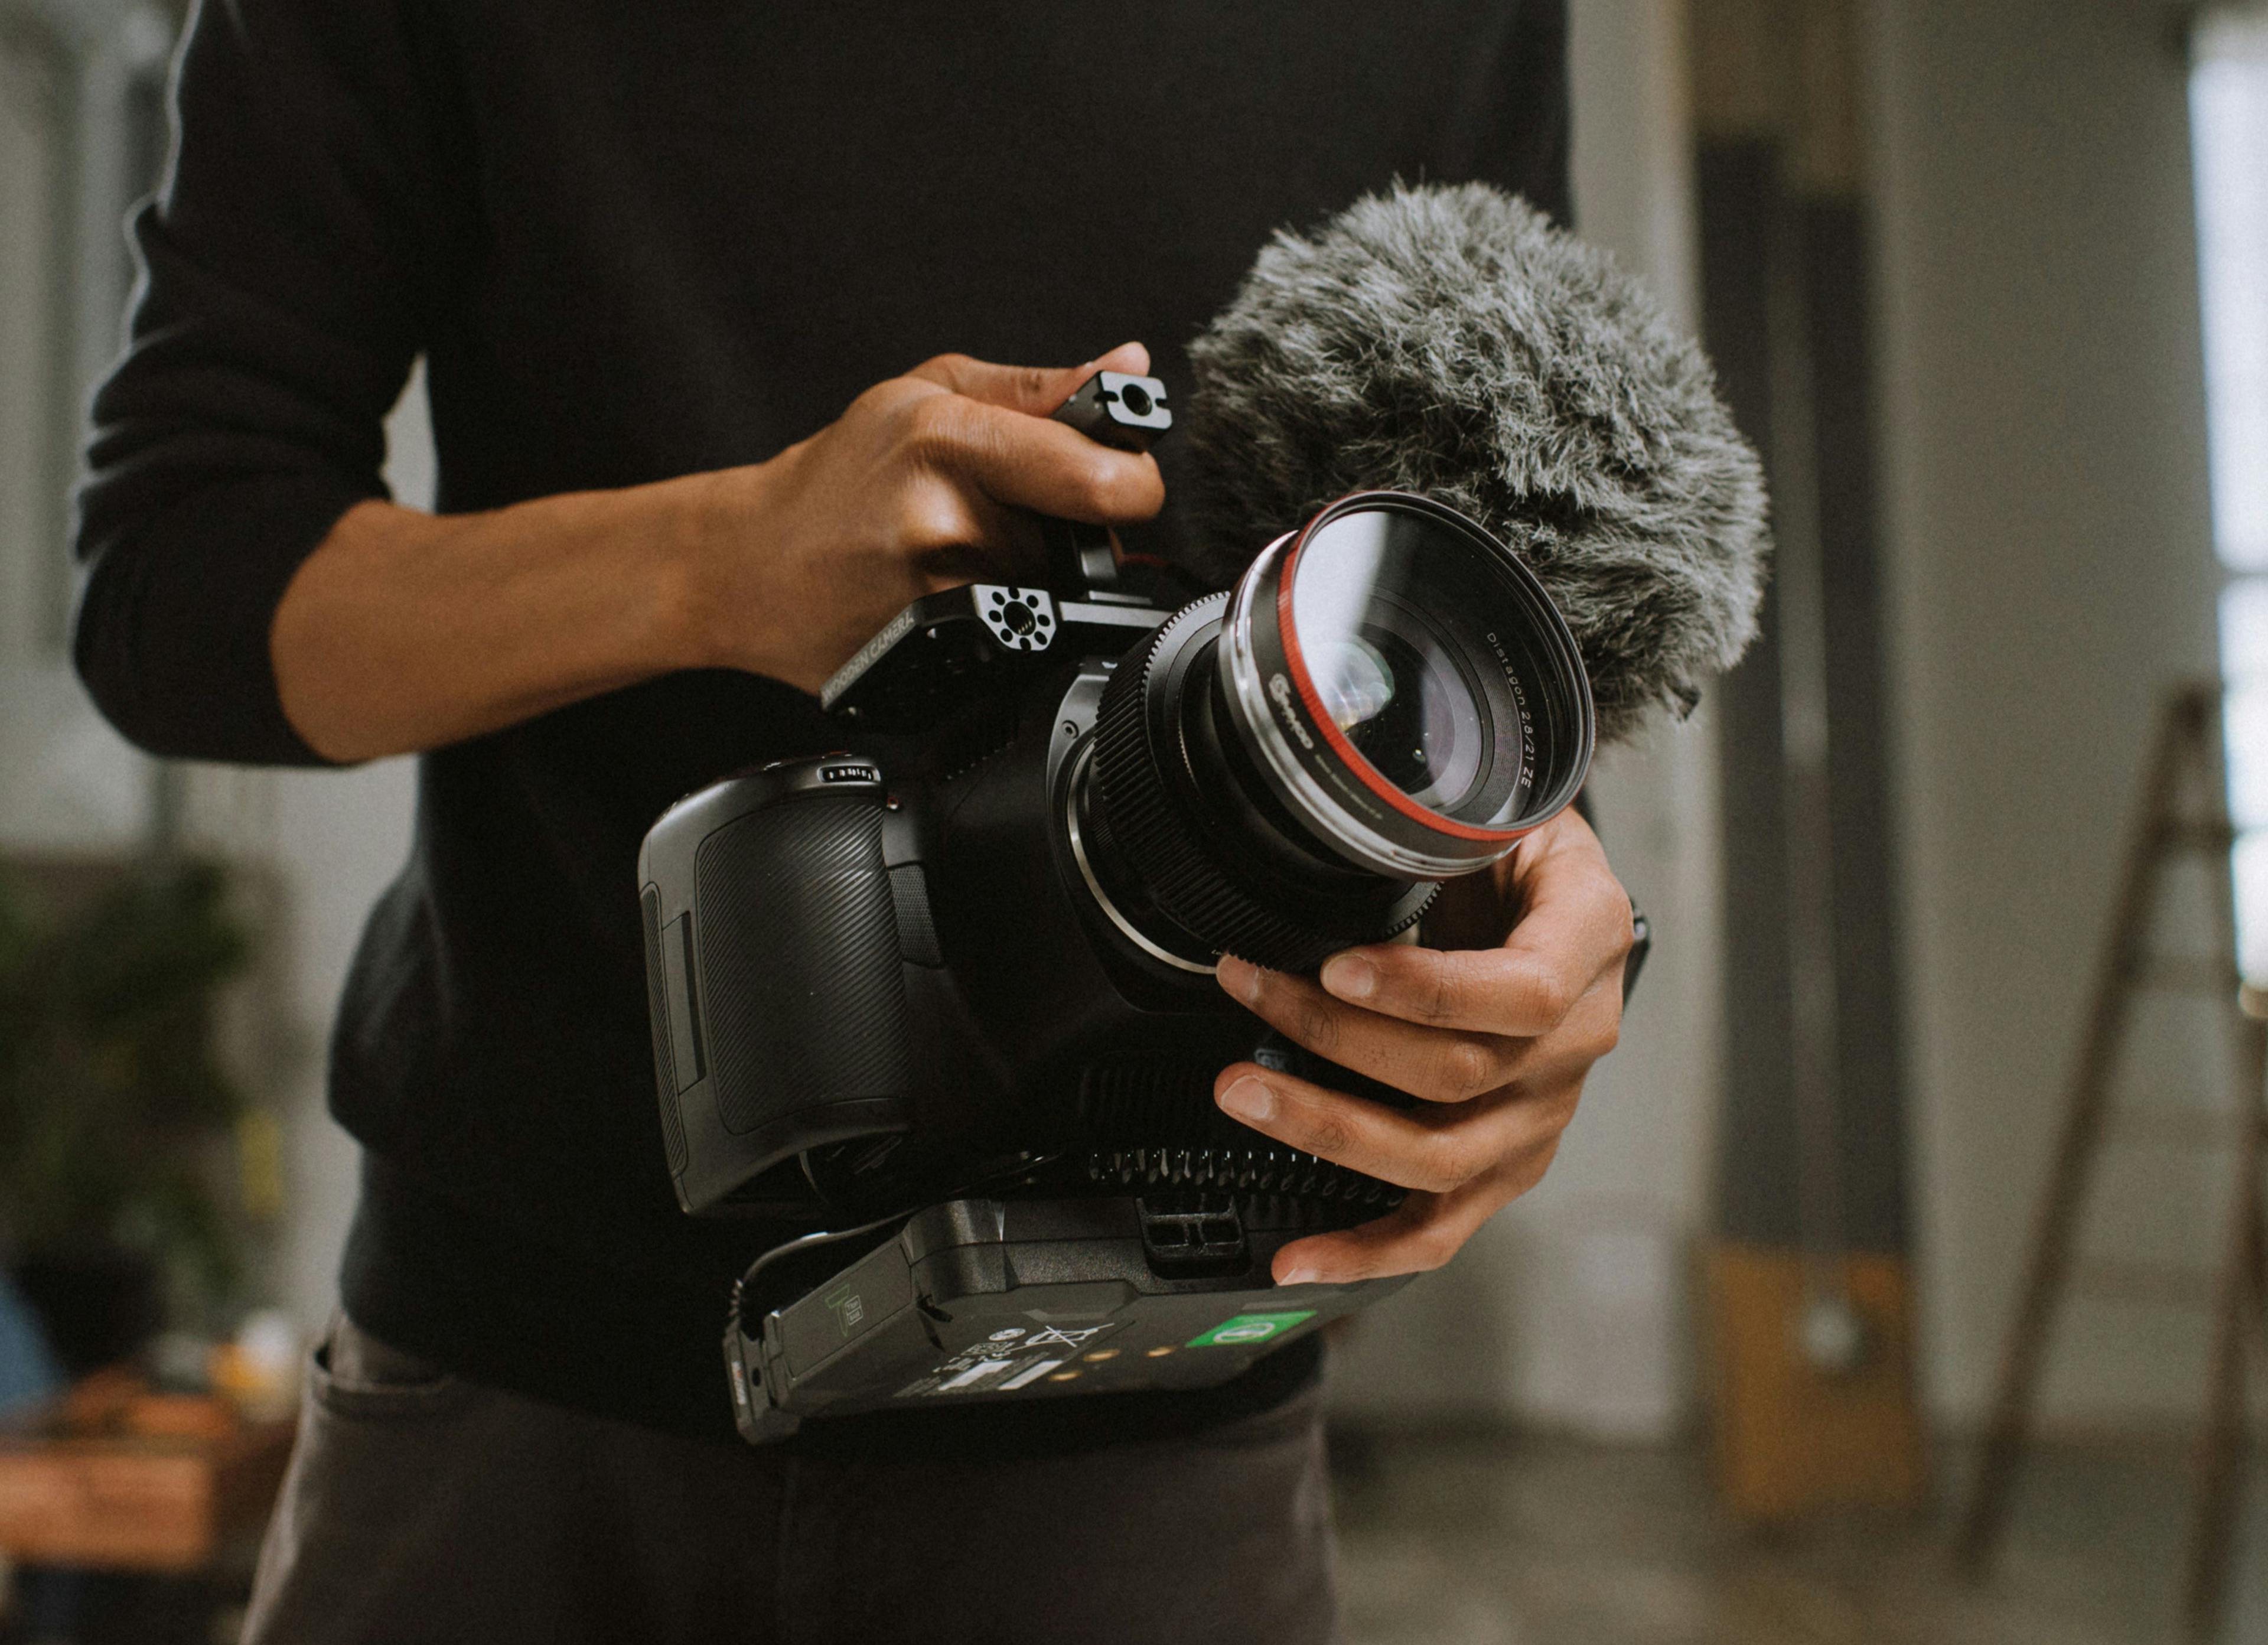 Rig up the BlackMagic camera for even greater footage.